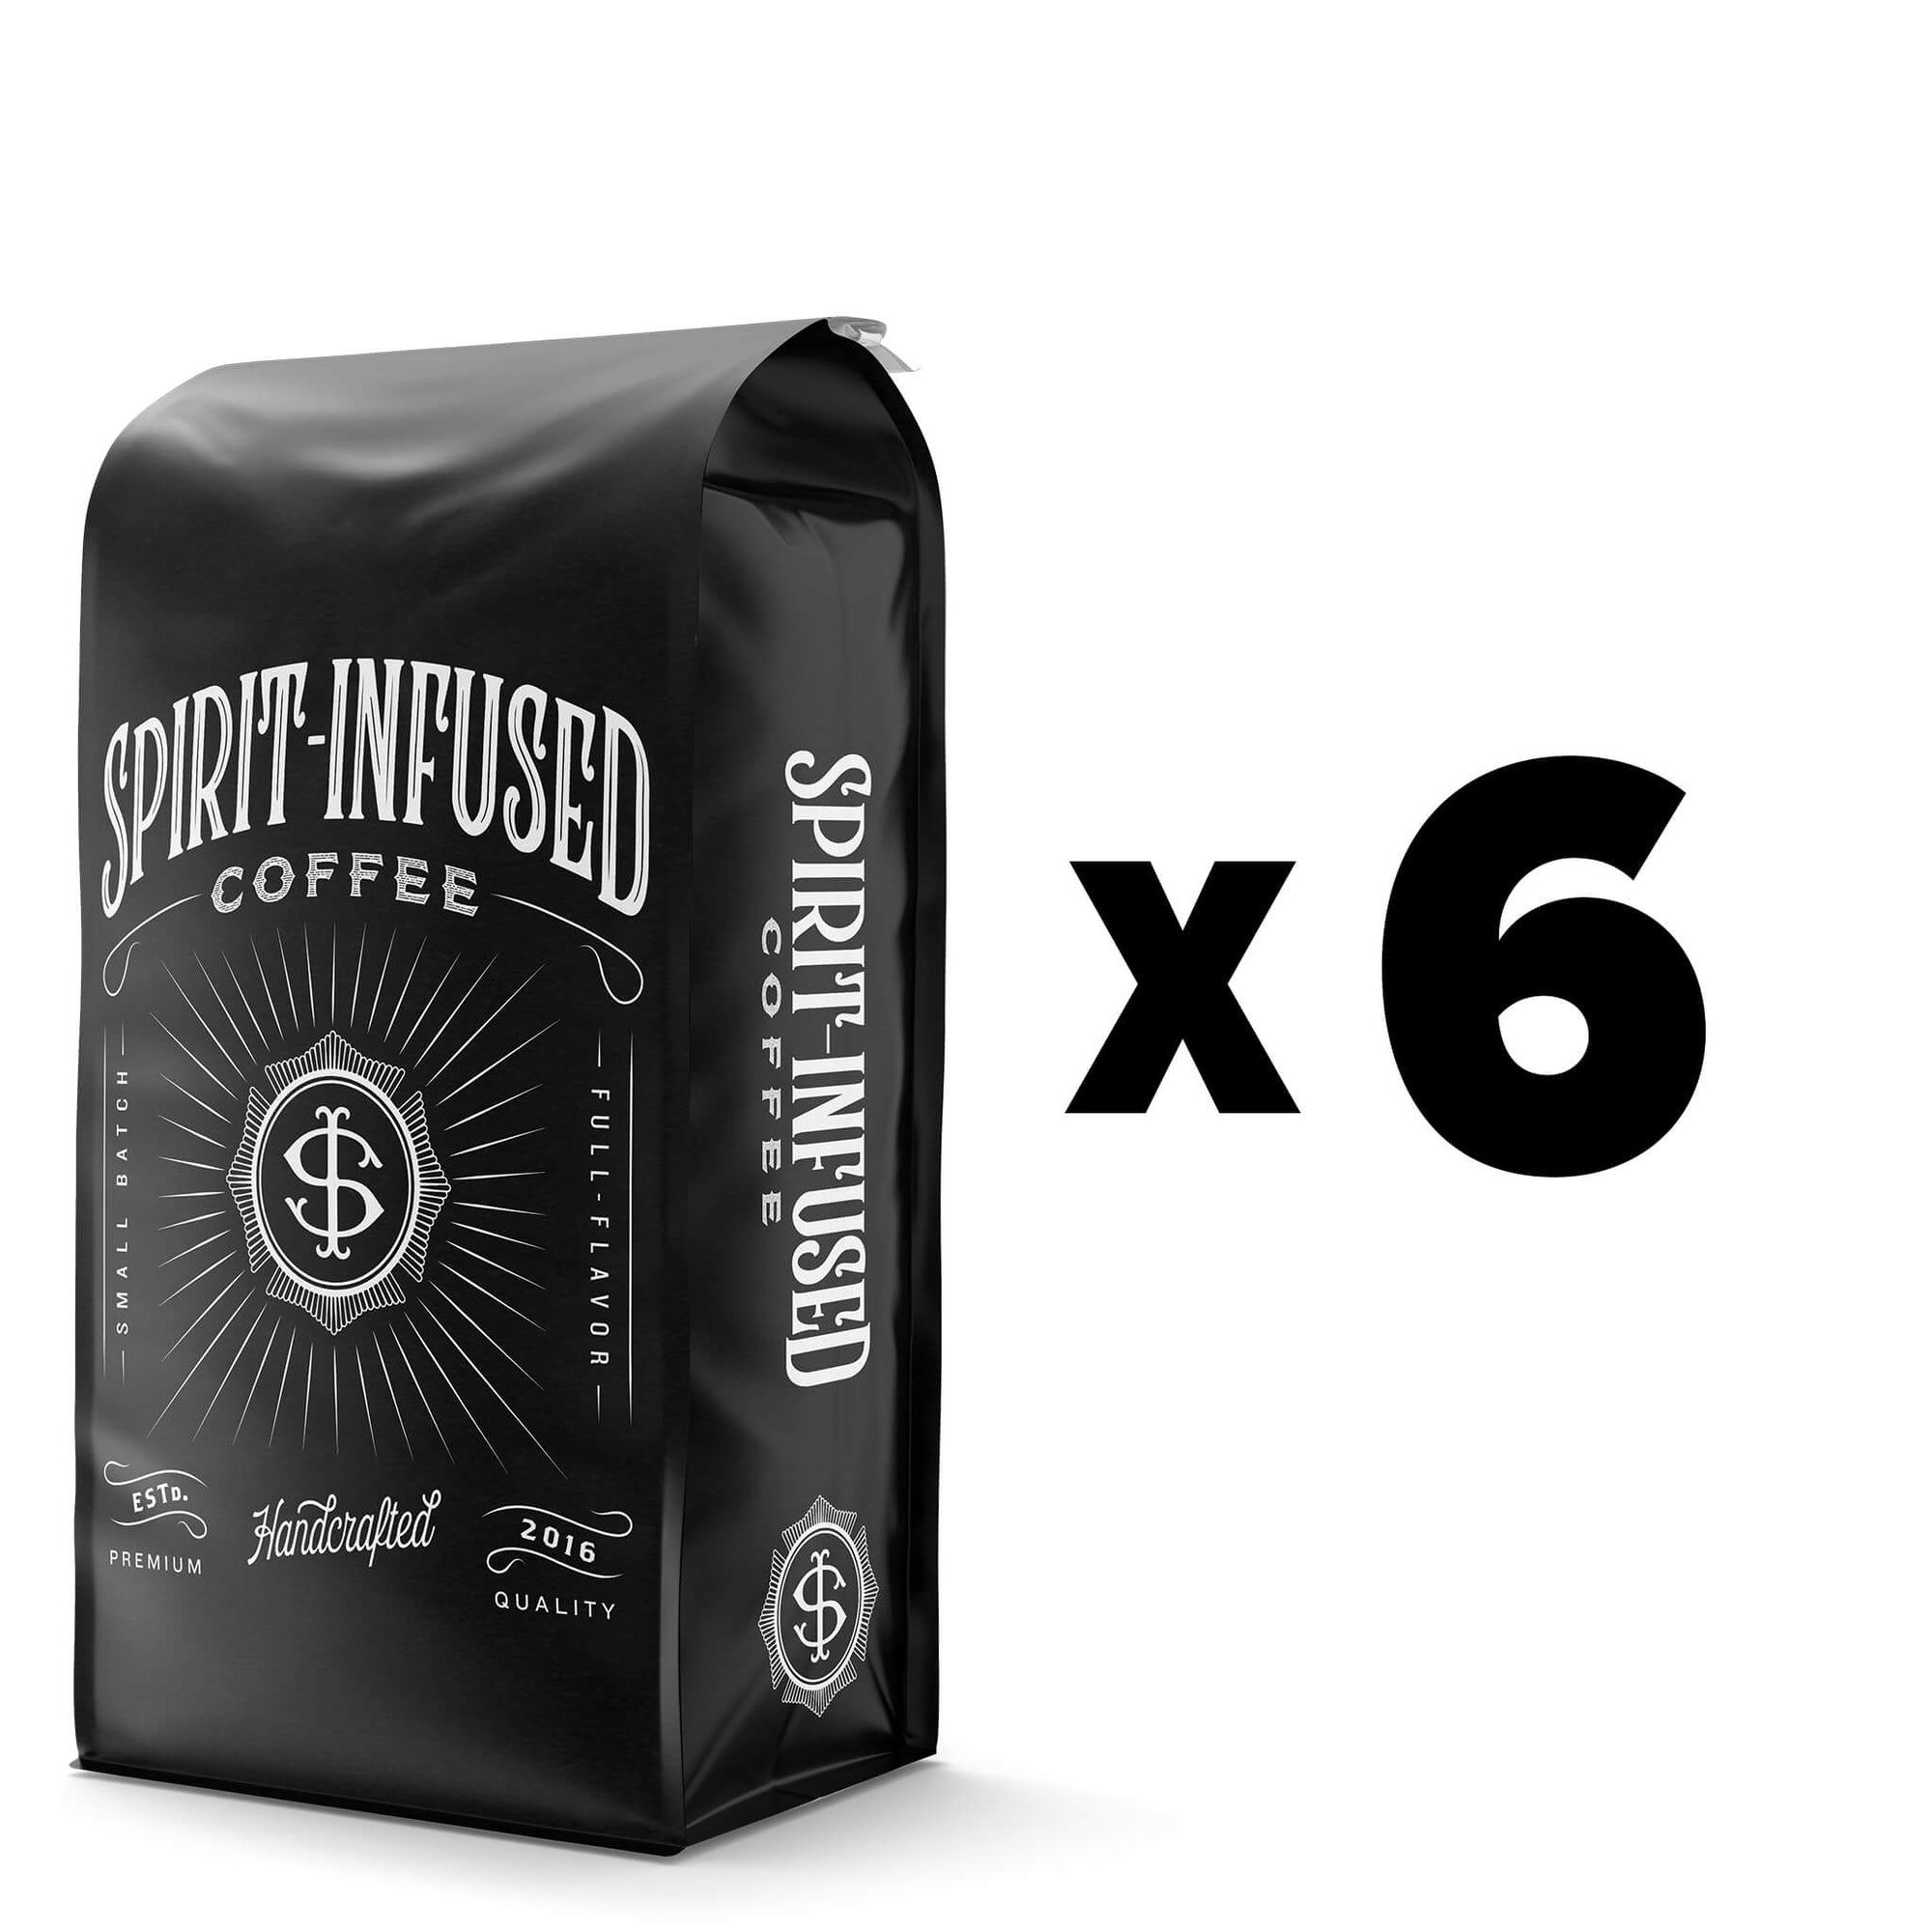 SPIRIT INFUSED COFFEE CLUB WHOLE BEAN - 6 MONTH PREPAID SUBSCRIPTION